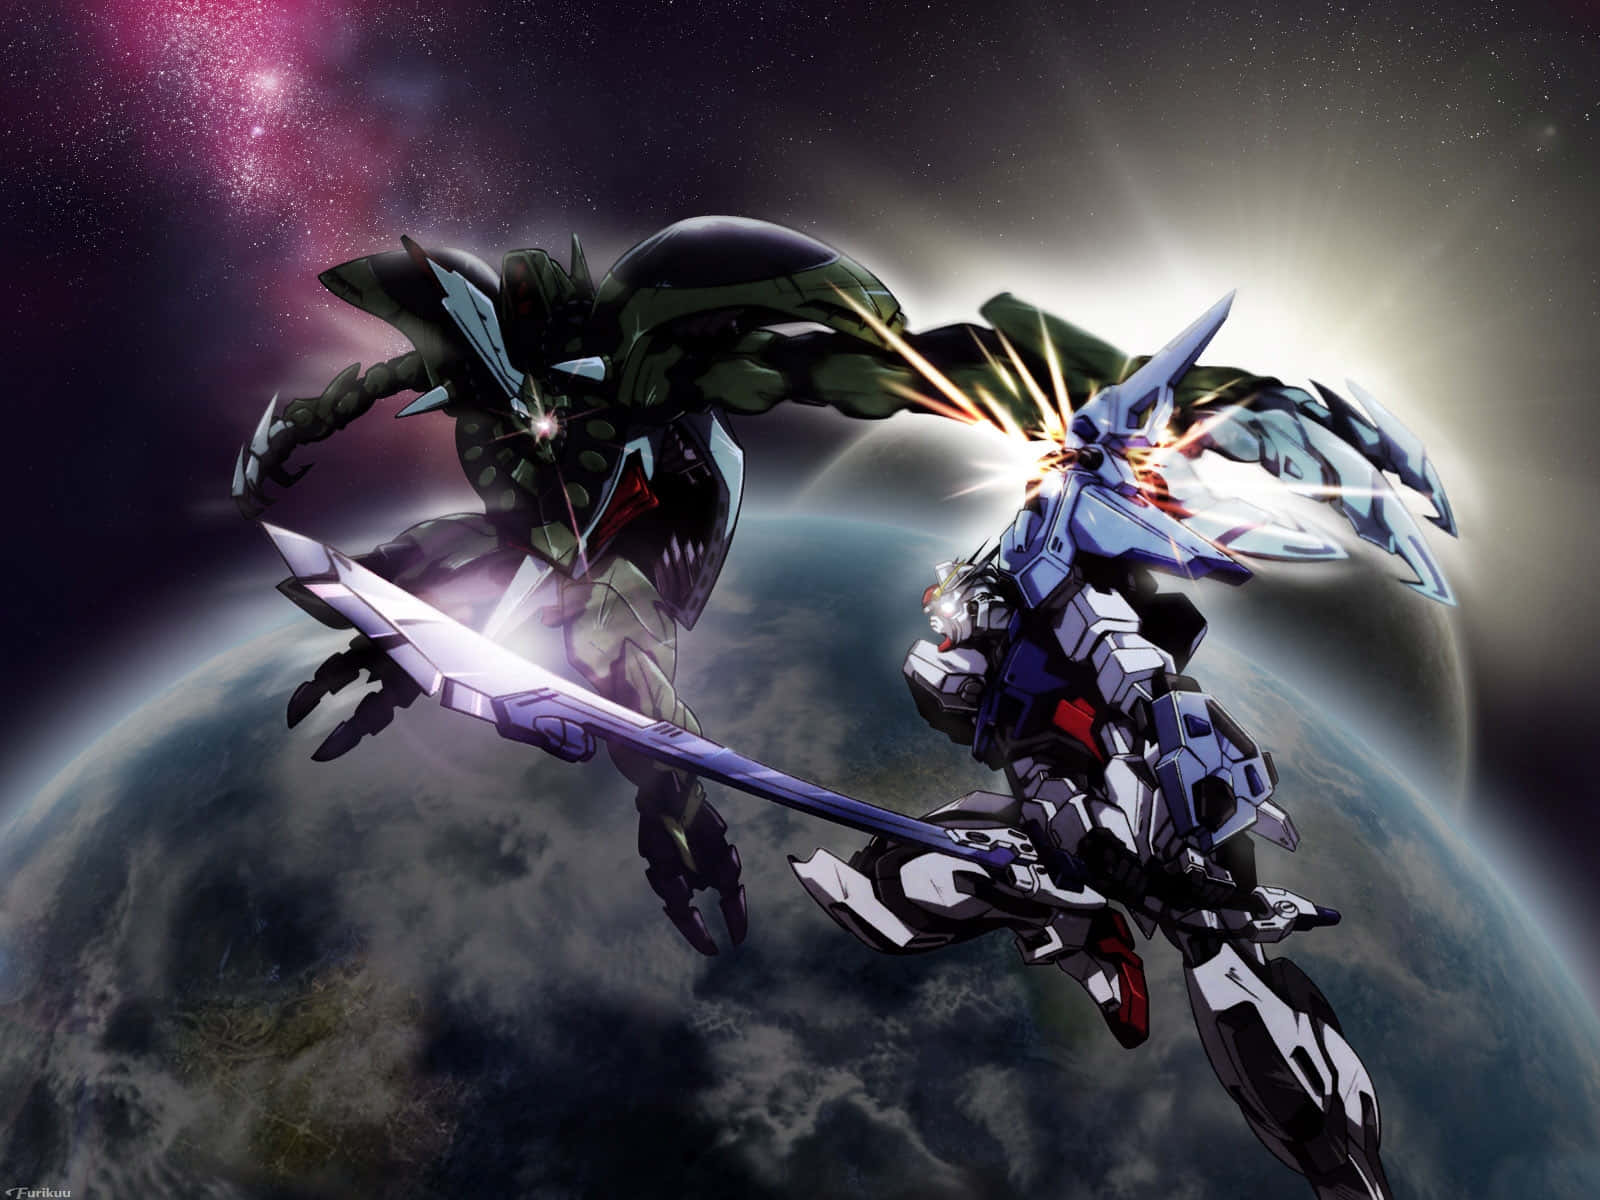 Explore the World of Gundam – Featuring the Mech Type FA-78-3